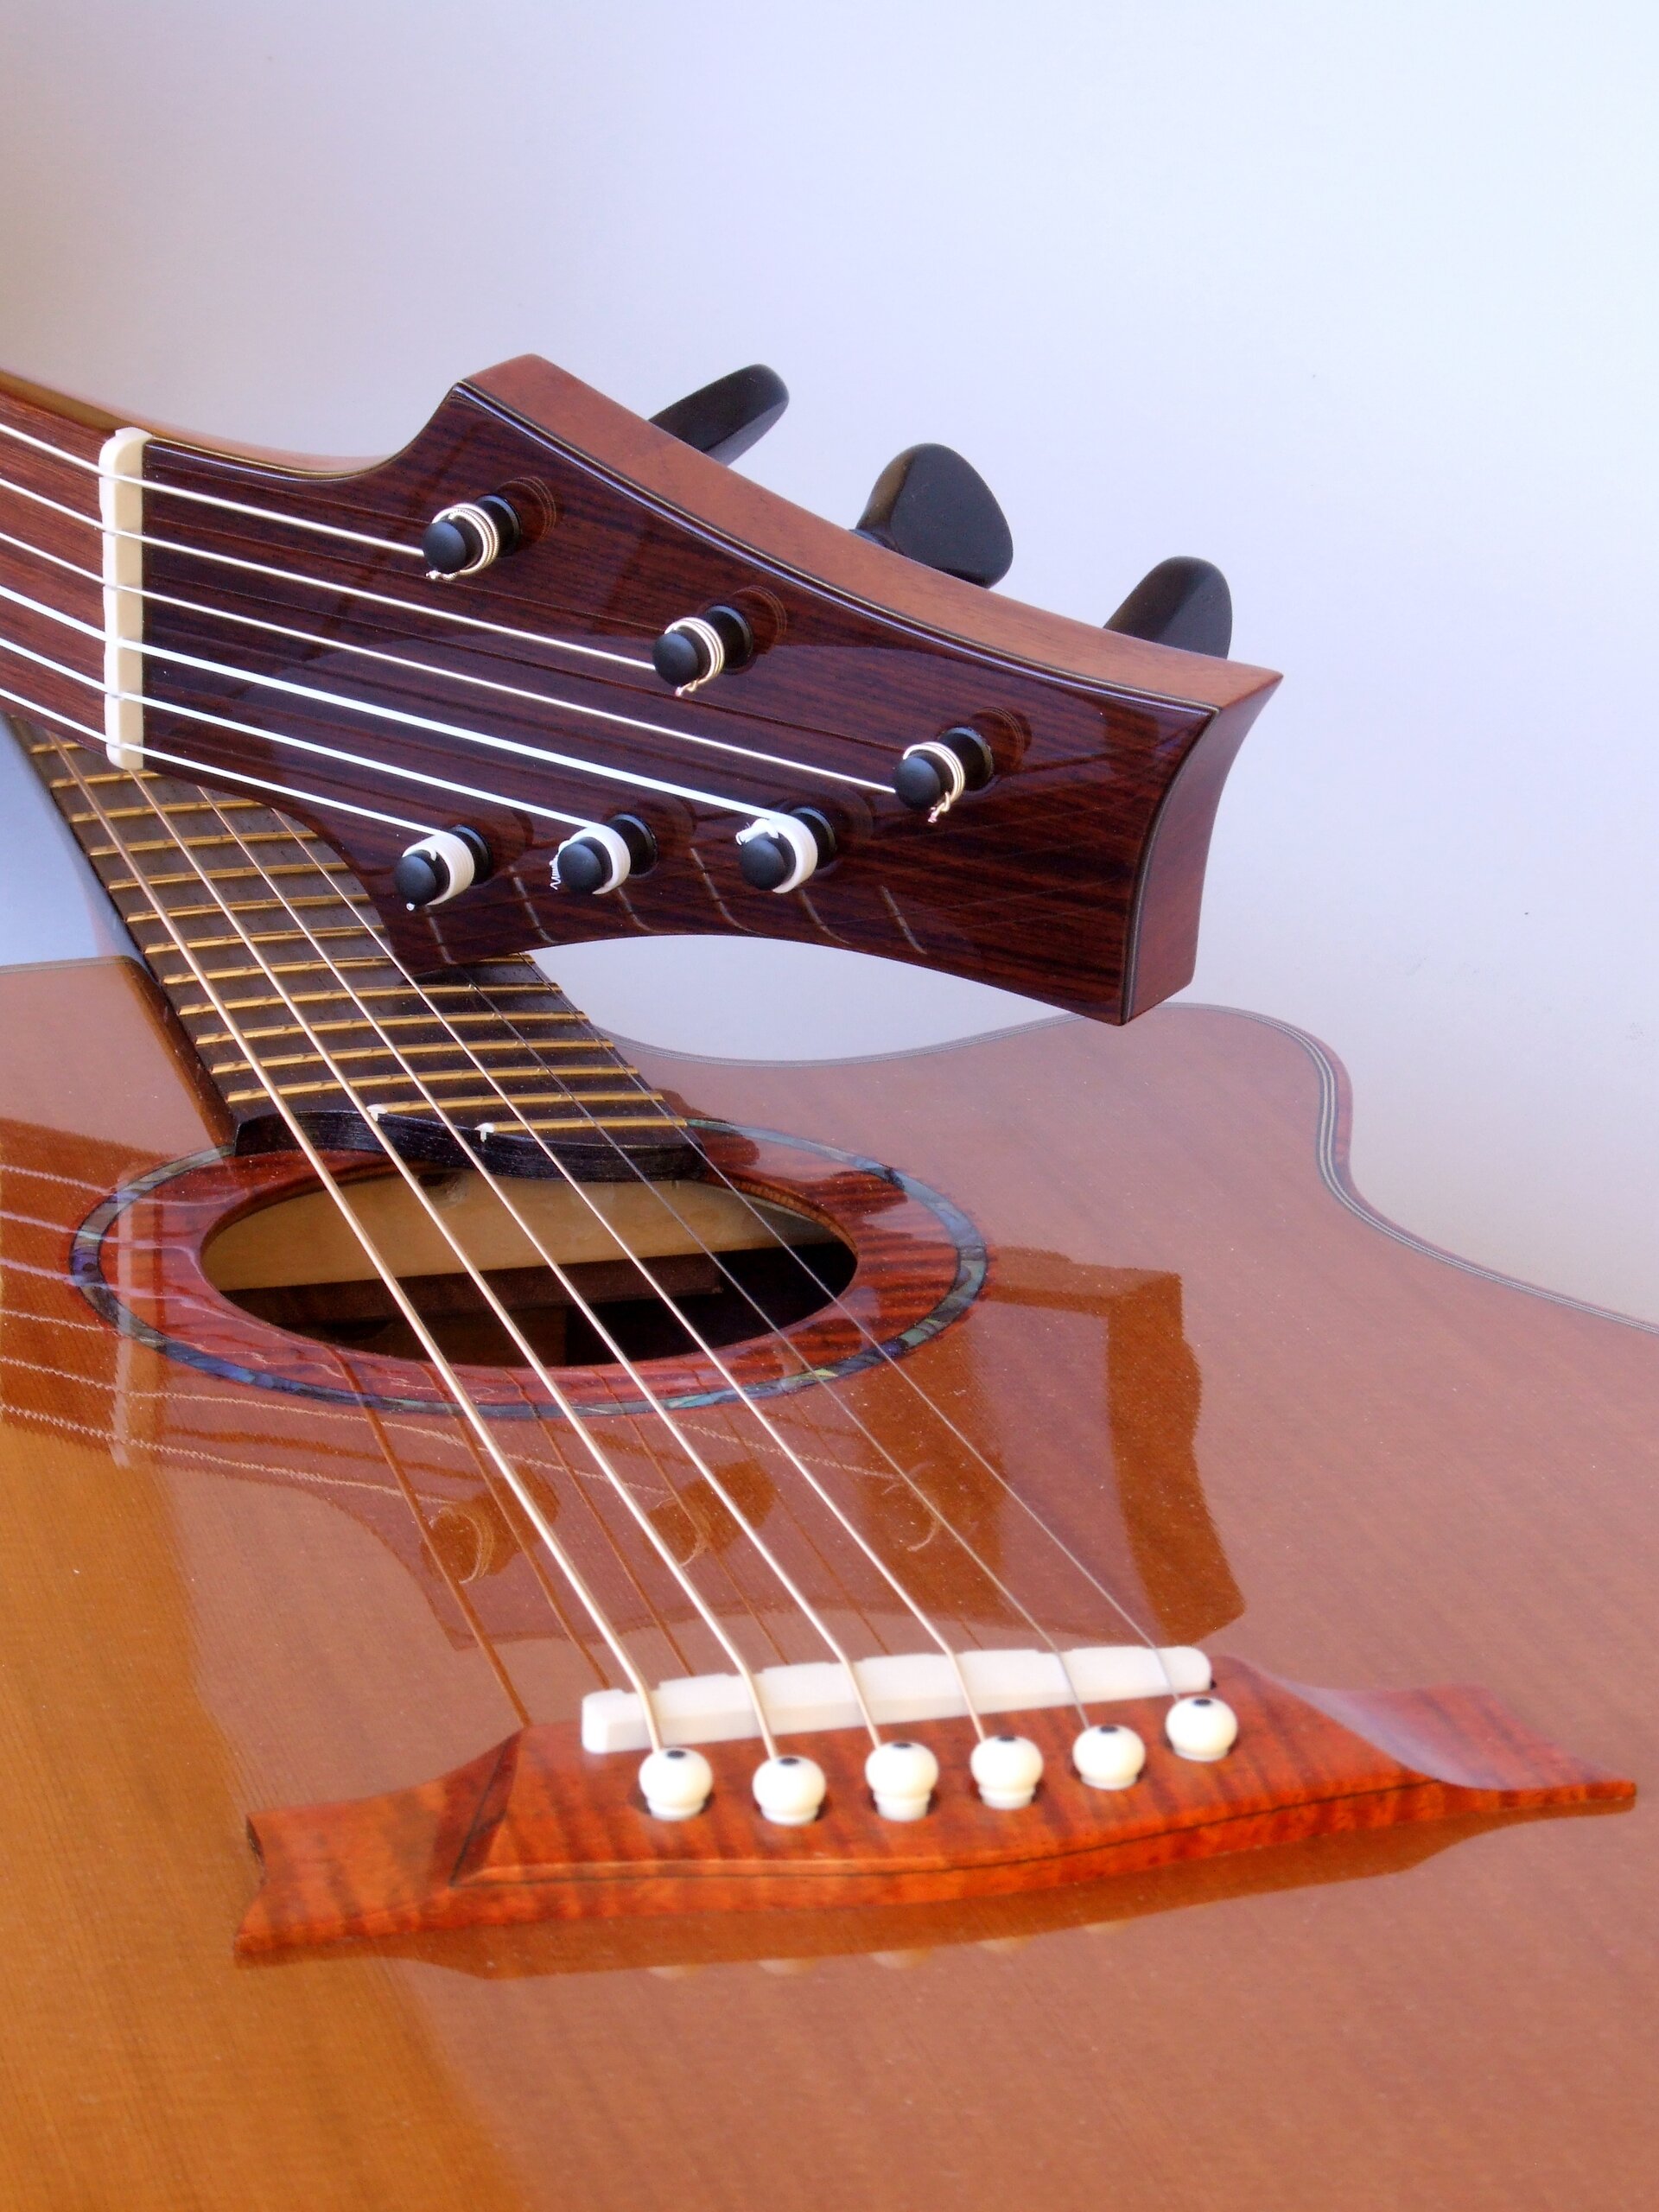 Classical guitar headstock resting on a steel string guitar